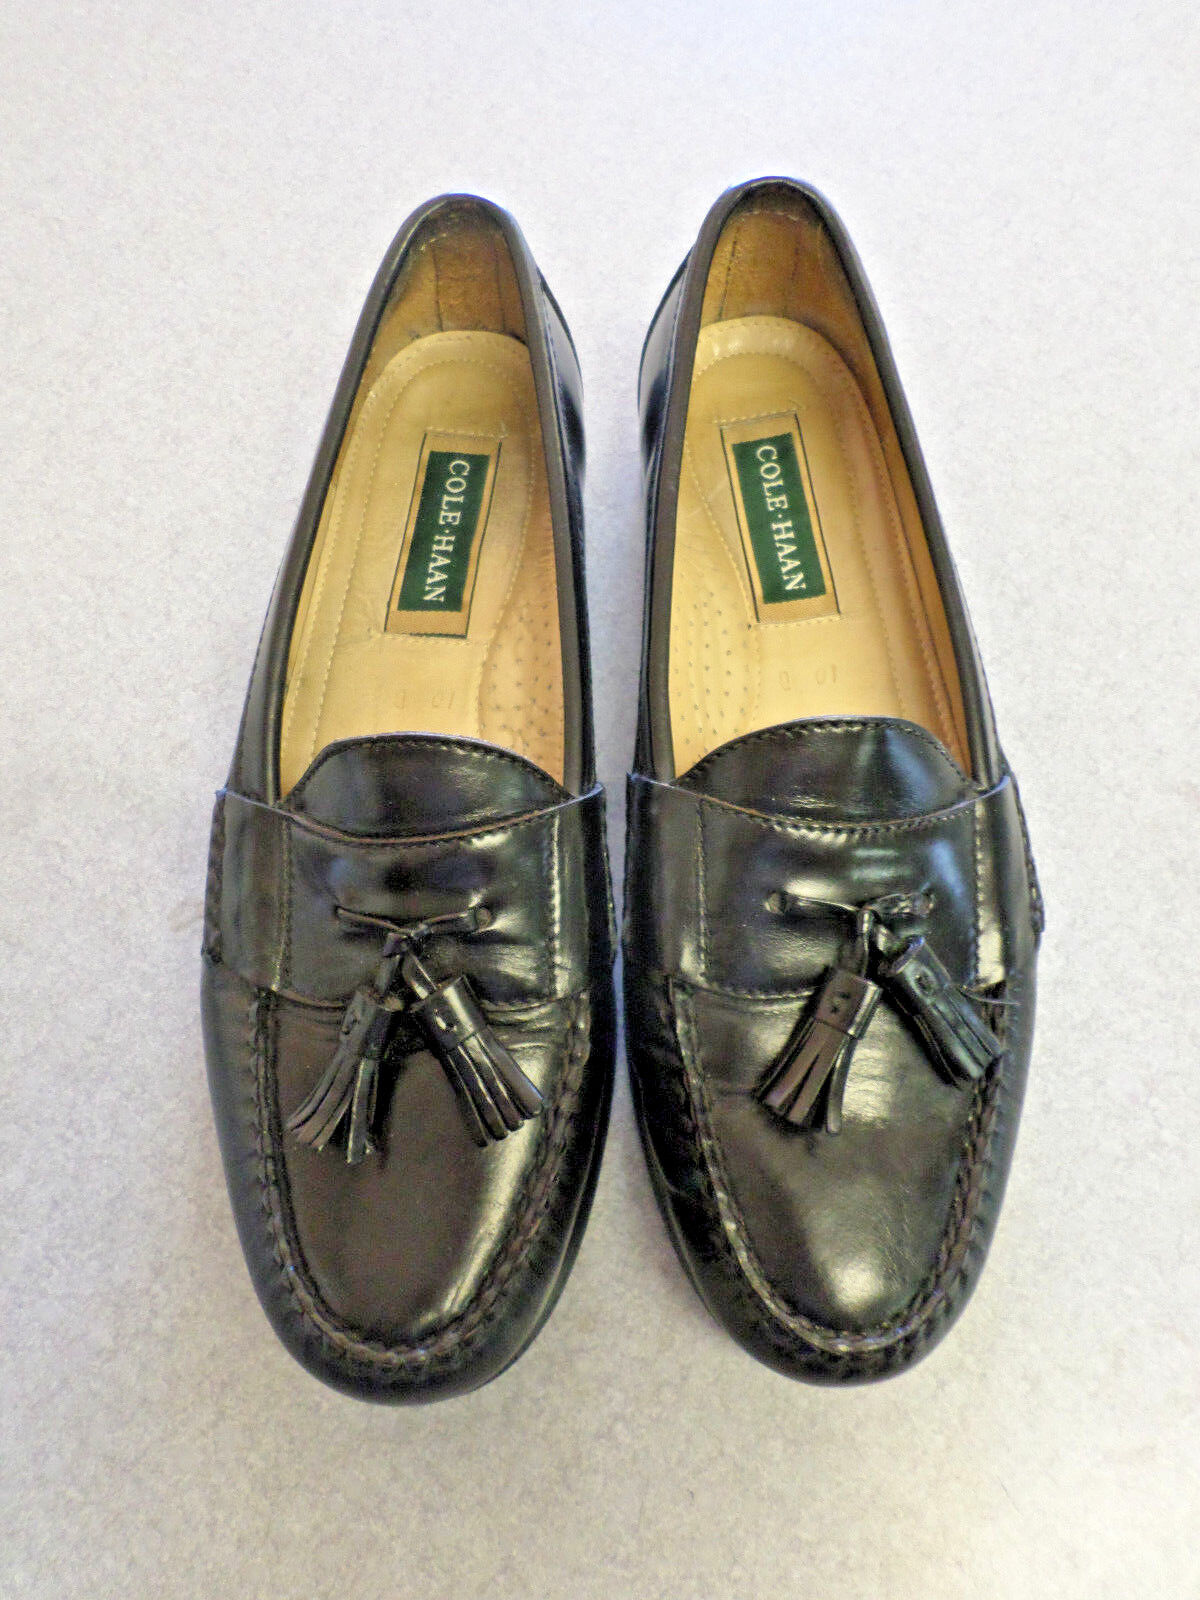 Cole Haan Sale Cheap price black leather tassel 10 loafers. Men#039;s D